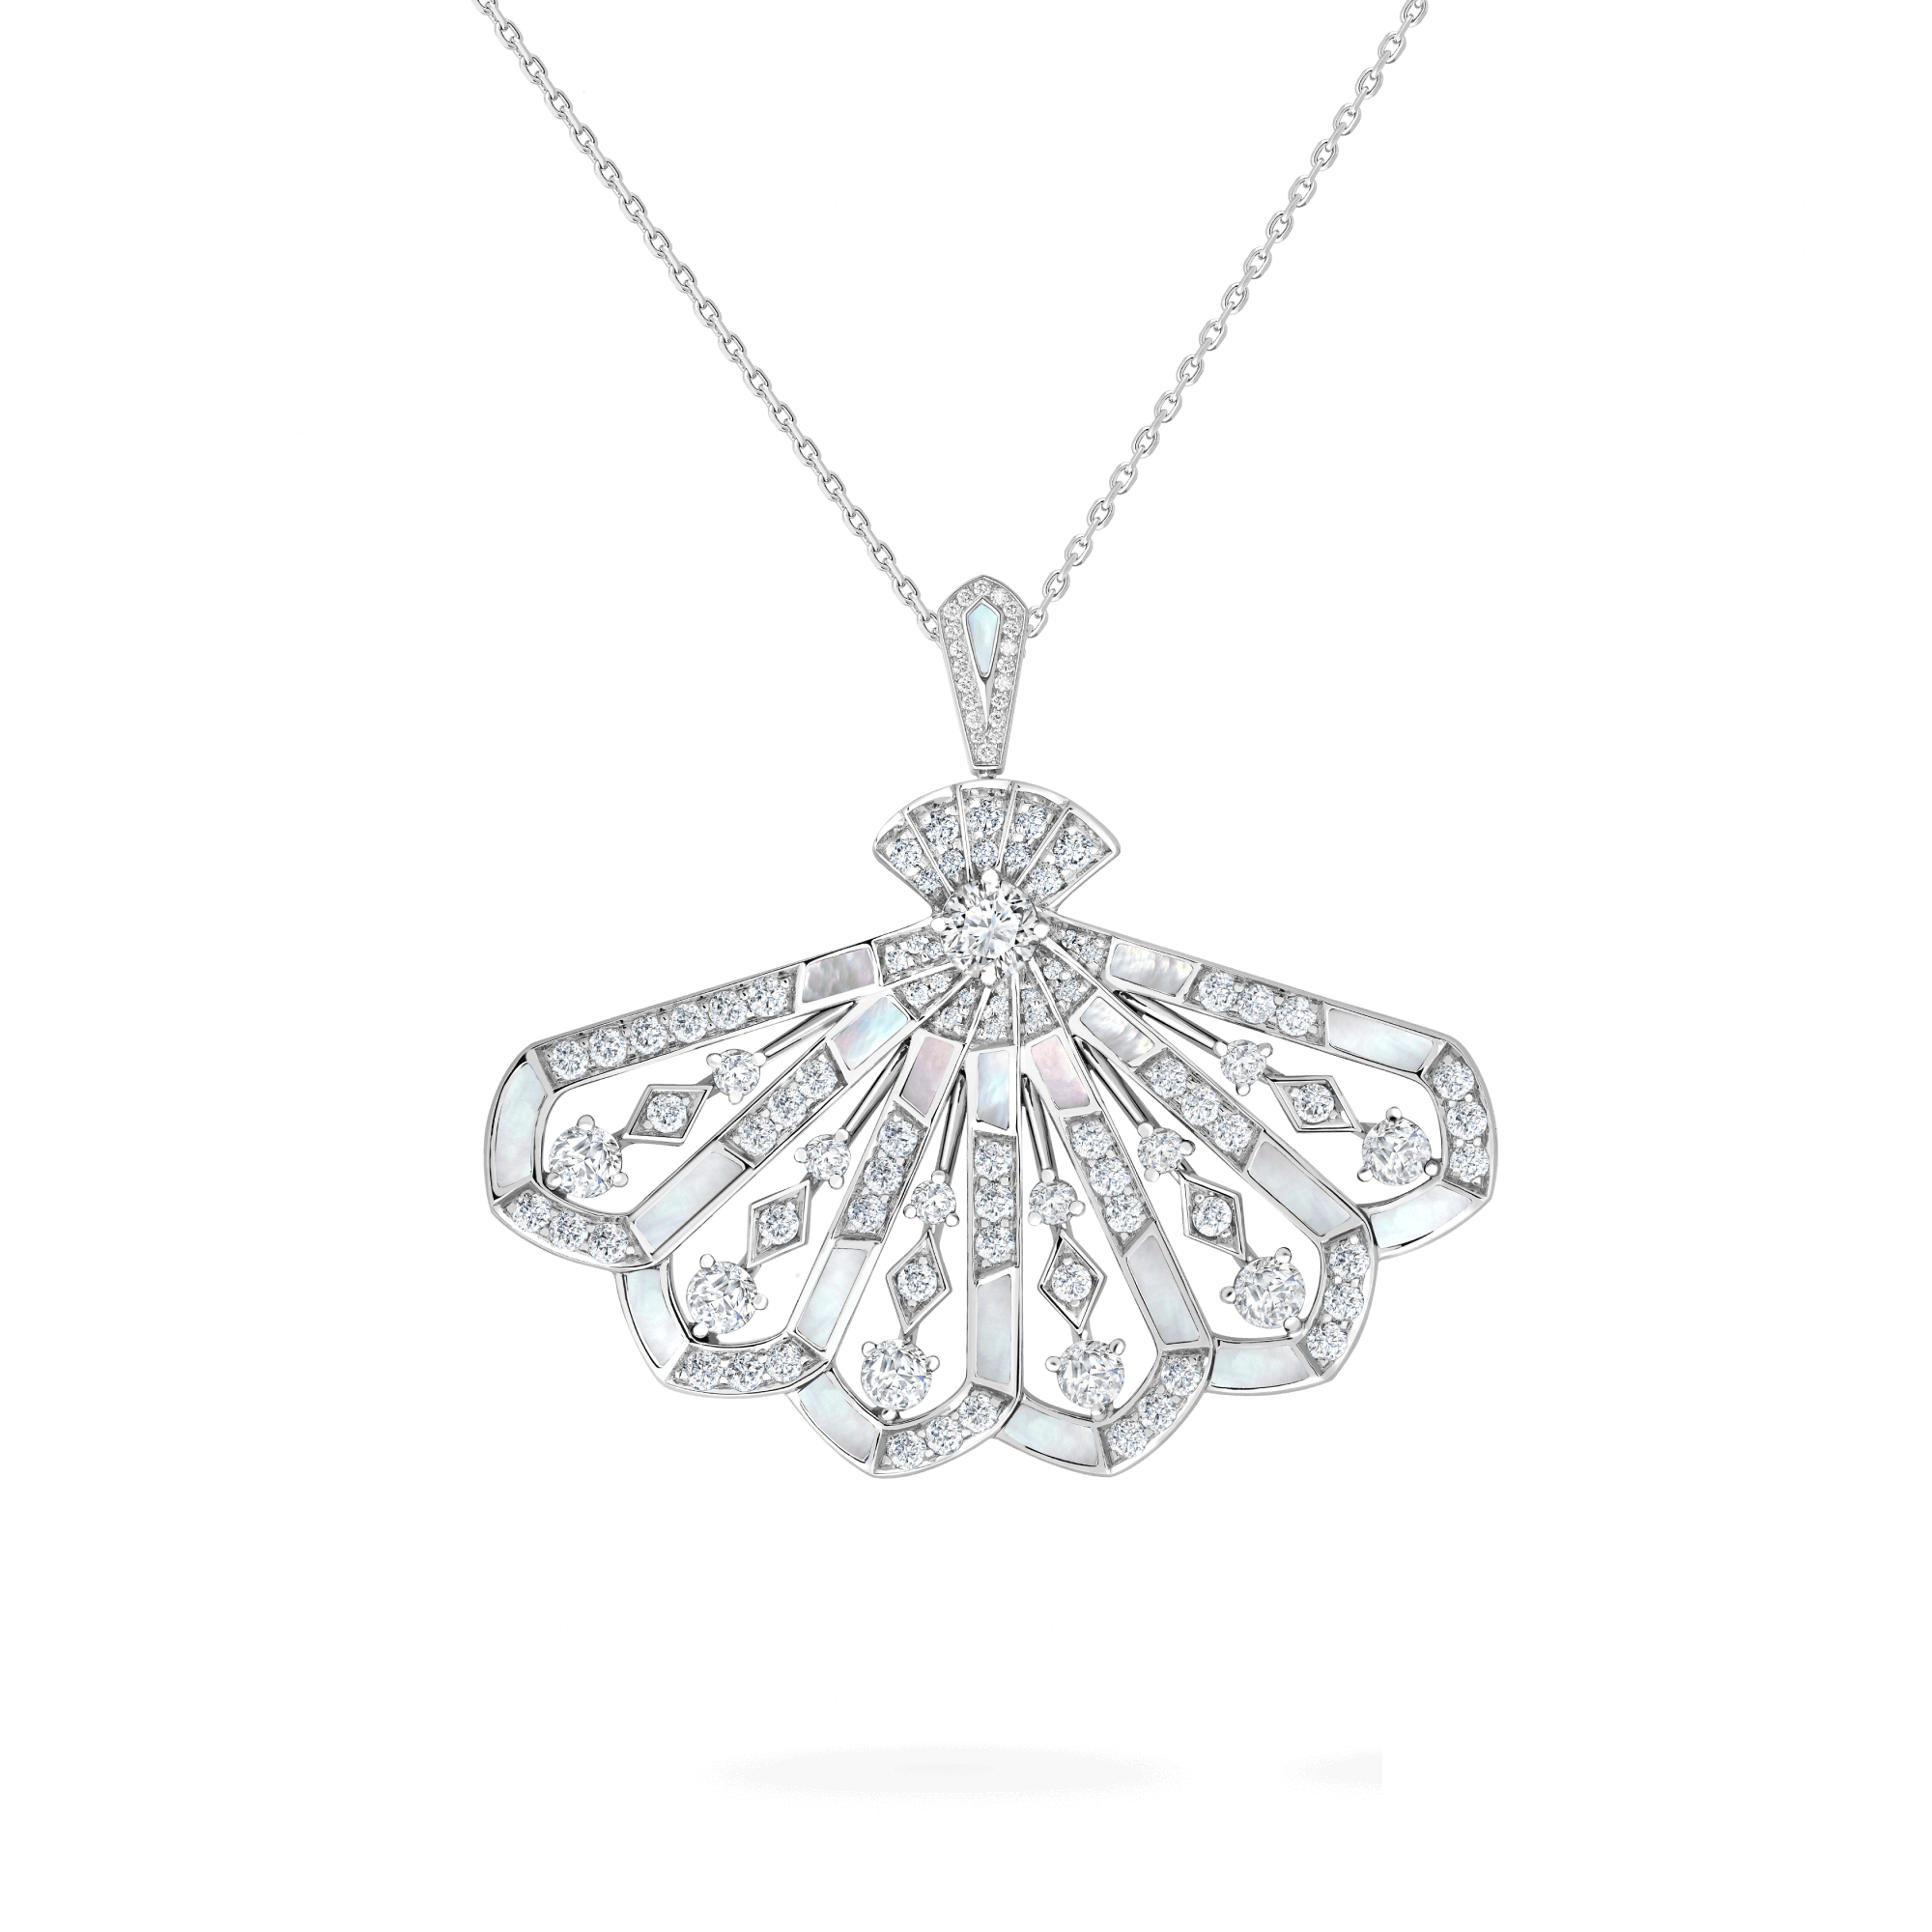 Garrard Fanfare Symphony jewellery collection Diamond Drop Pendant In 18ct White Gold with Mother of Pearl 2018753